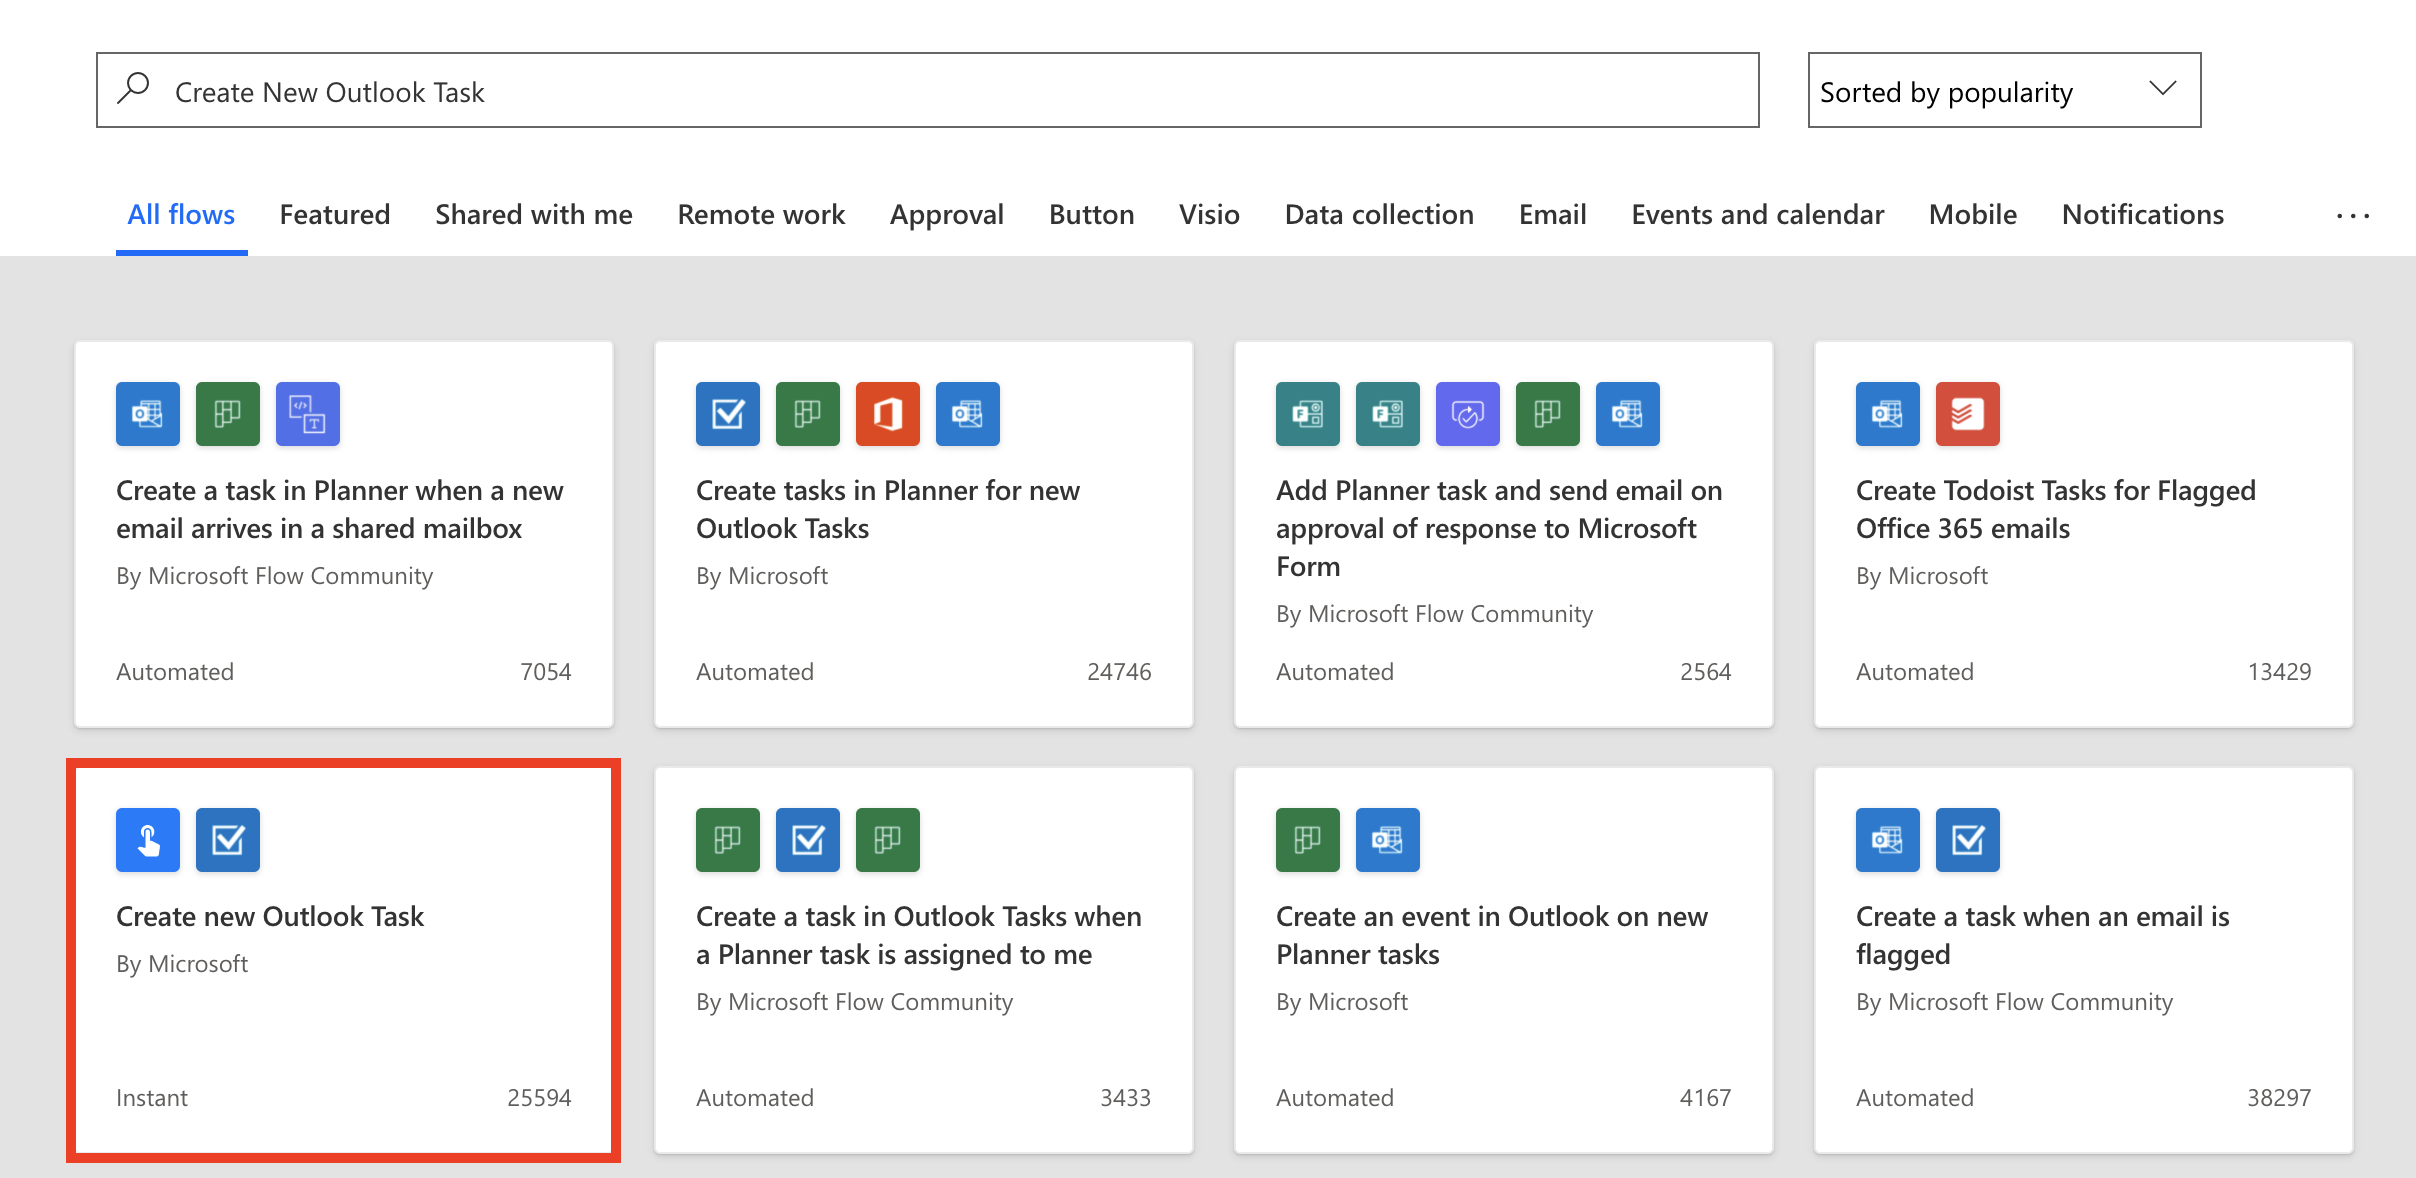 Screenshot of the Create a New Outlook Task tile as it appears in the search results.